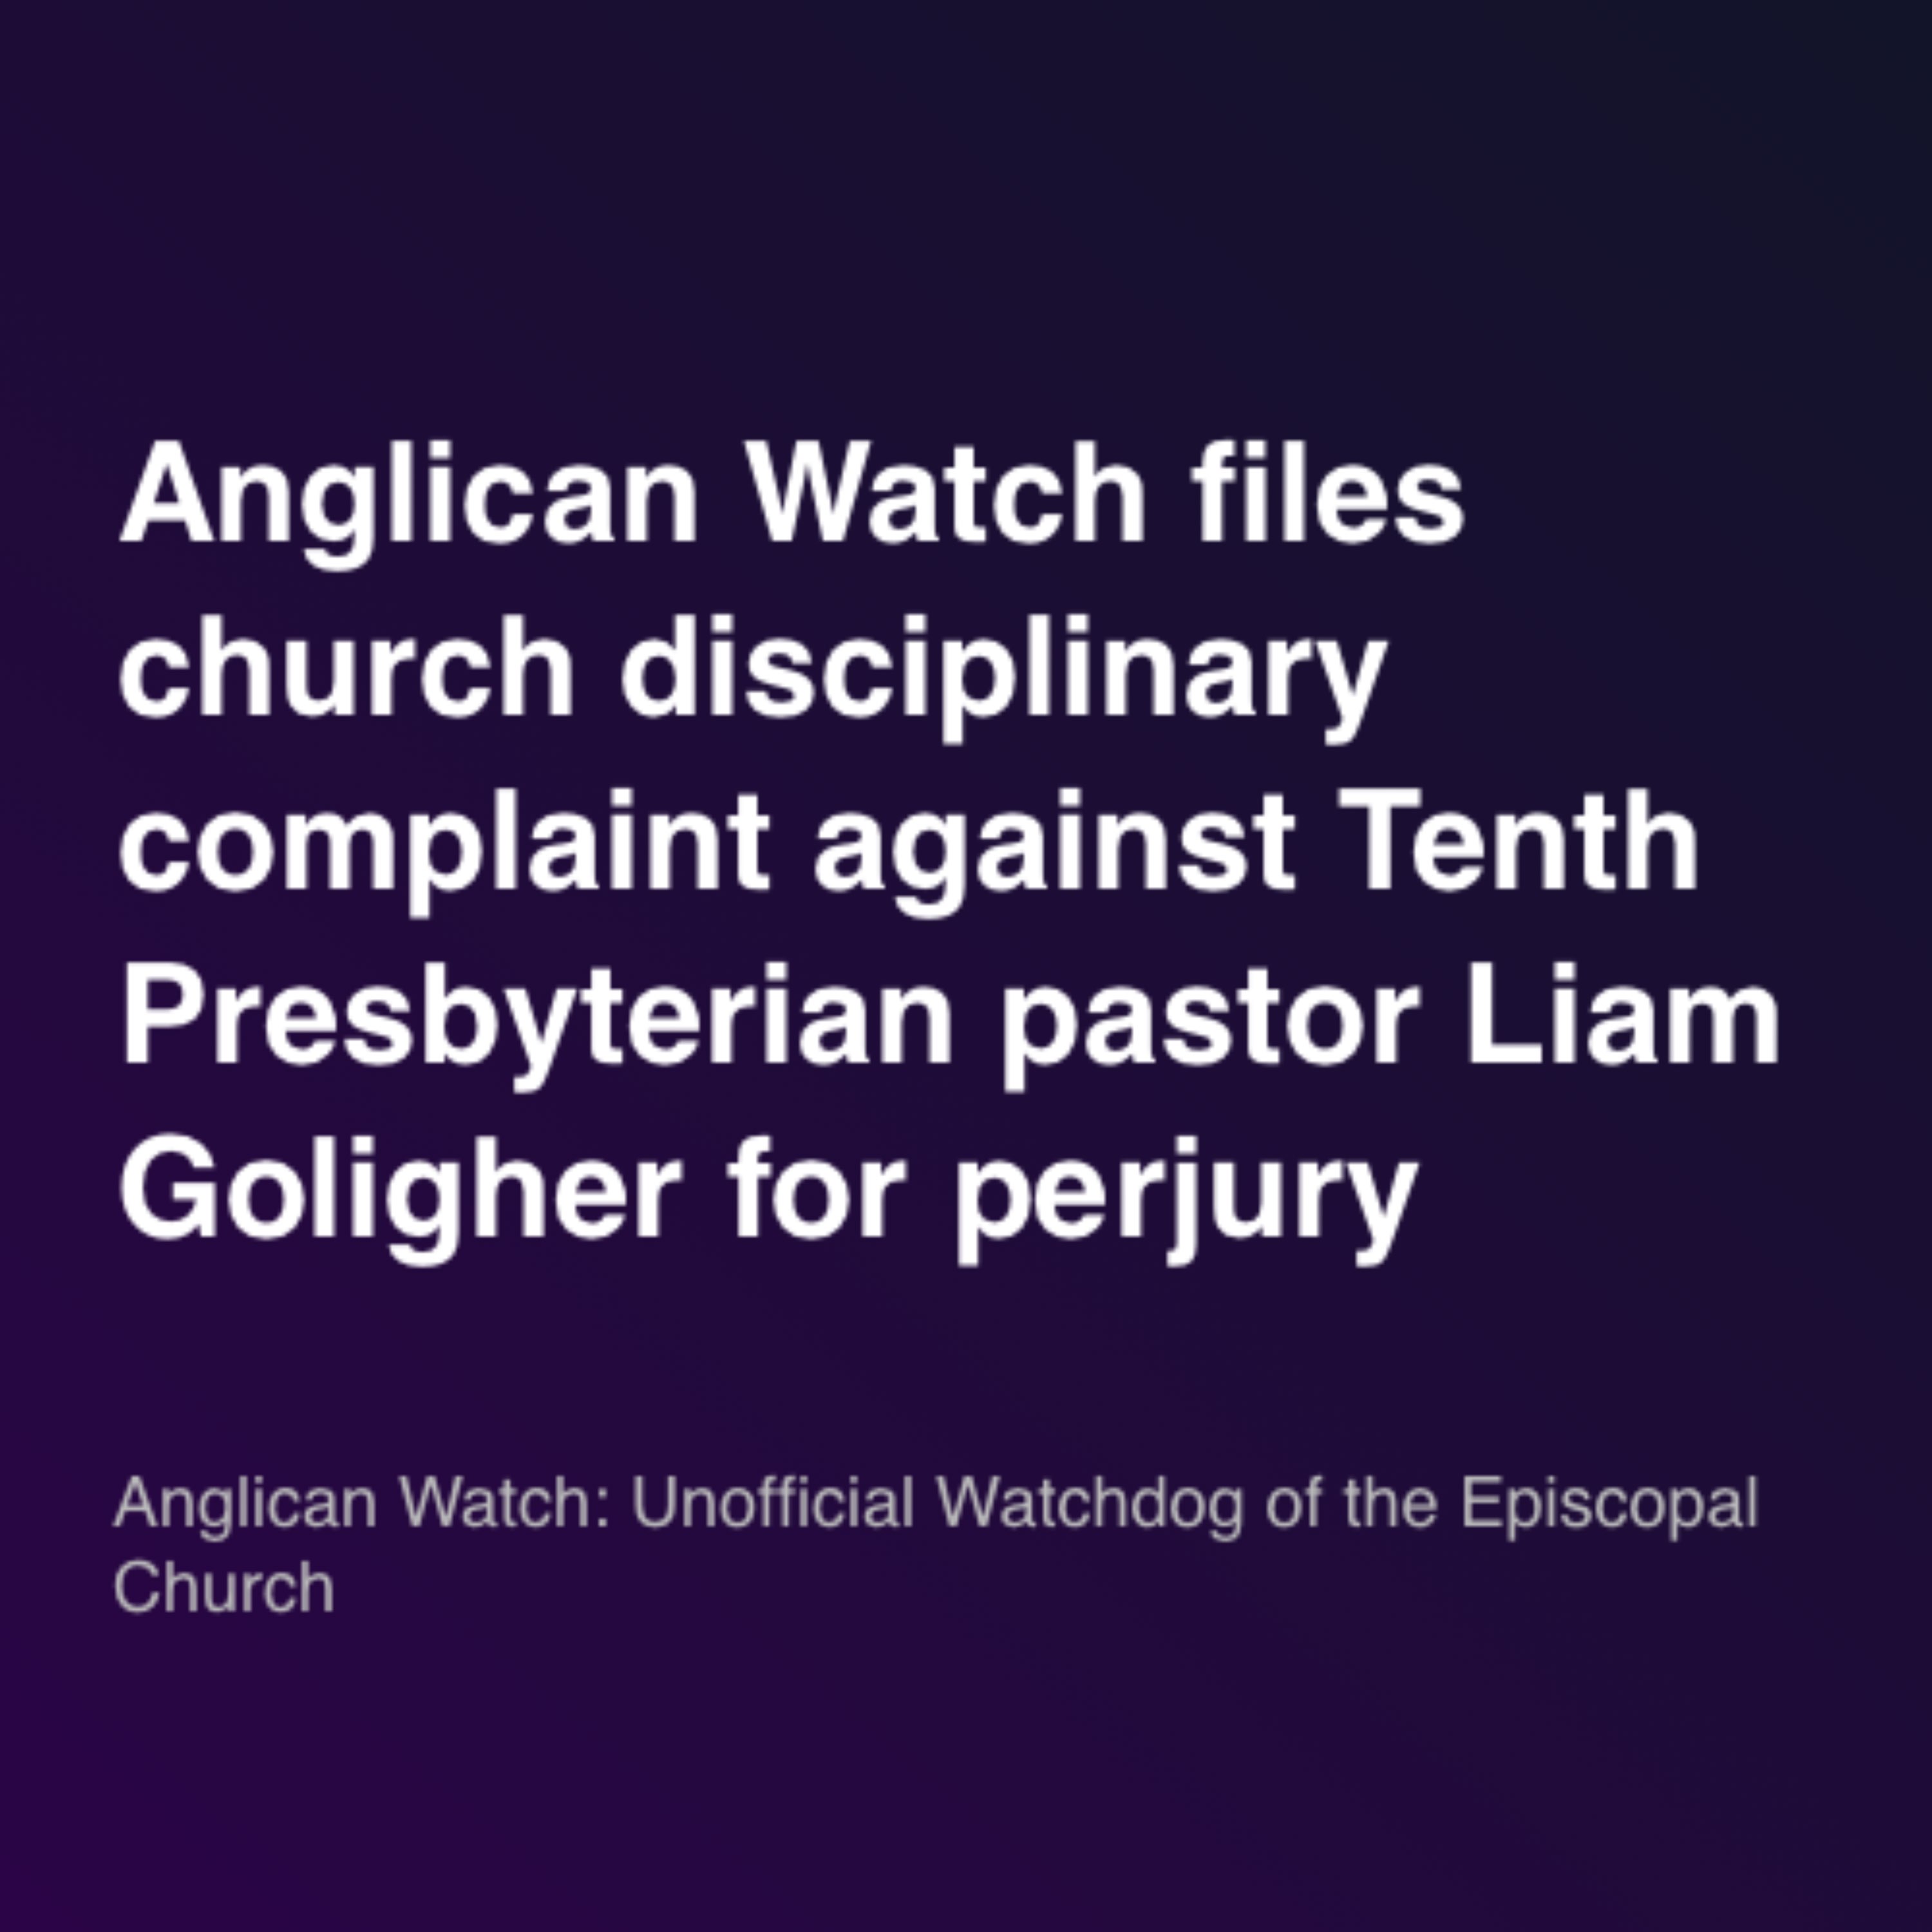 Anglican Watch files church disciplinary complaint against Tenth Presbyterian pastor Liam Goligher for perjury